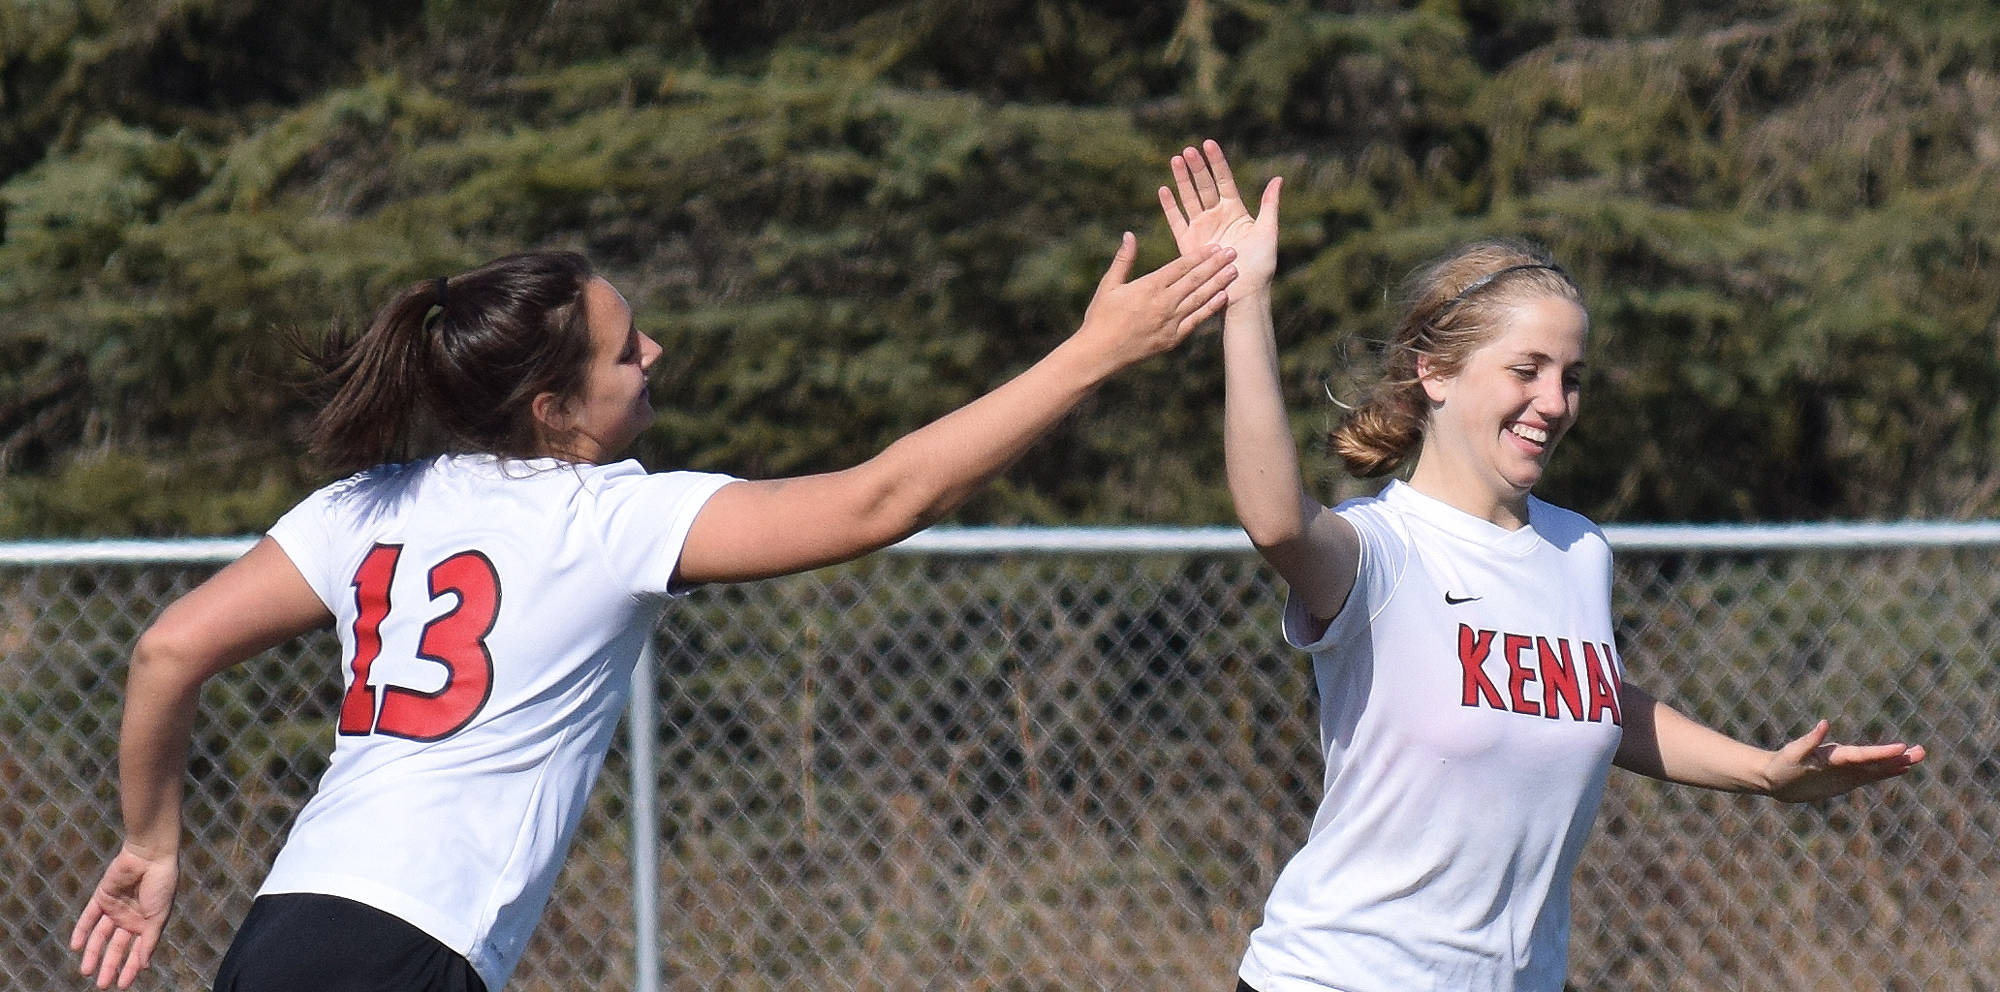 Kenai Central’s Faith Ivy (left) gives teammate Emily Halstead a high five after Halstead scored in the second half against Nikiski Friday afternoon at Ed Hollier Field in Kenai. (Photo by Joey Klecka/Peninsula Clarion)